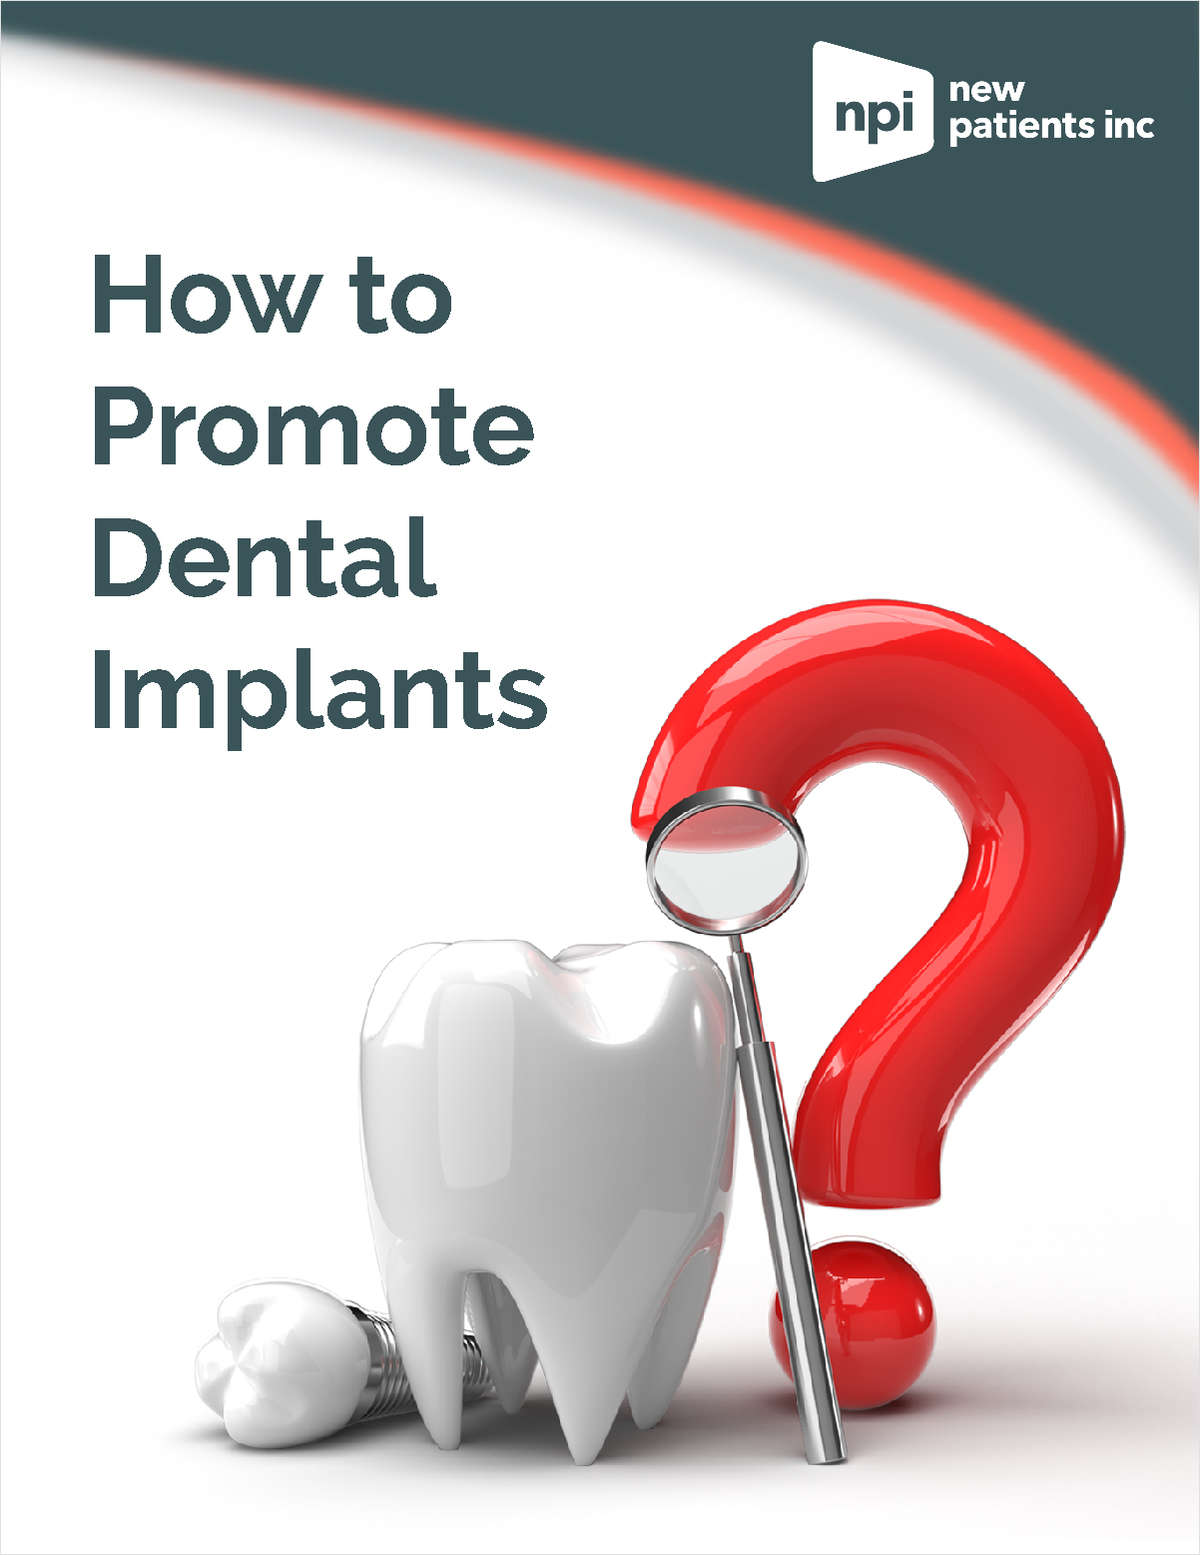 How to Promote Dental Implants